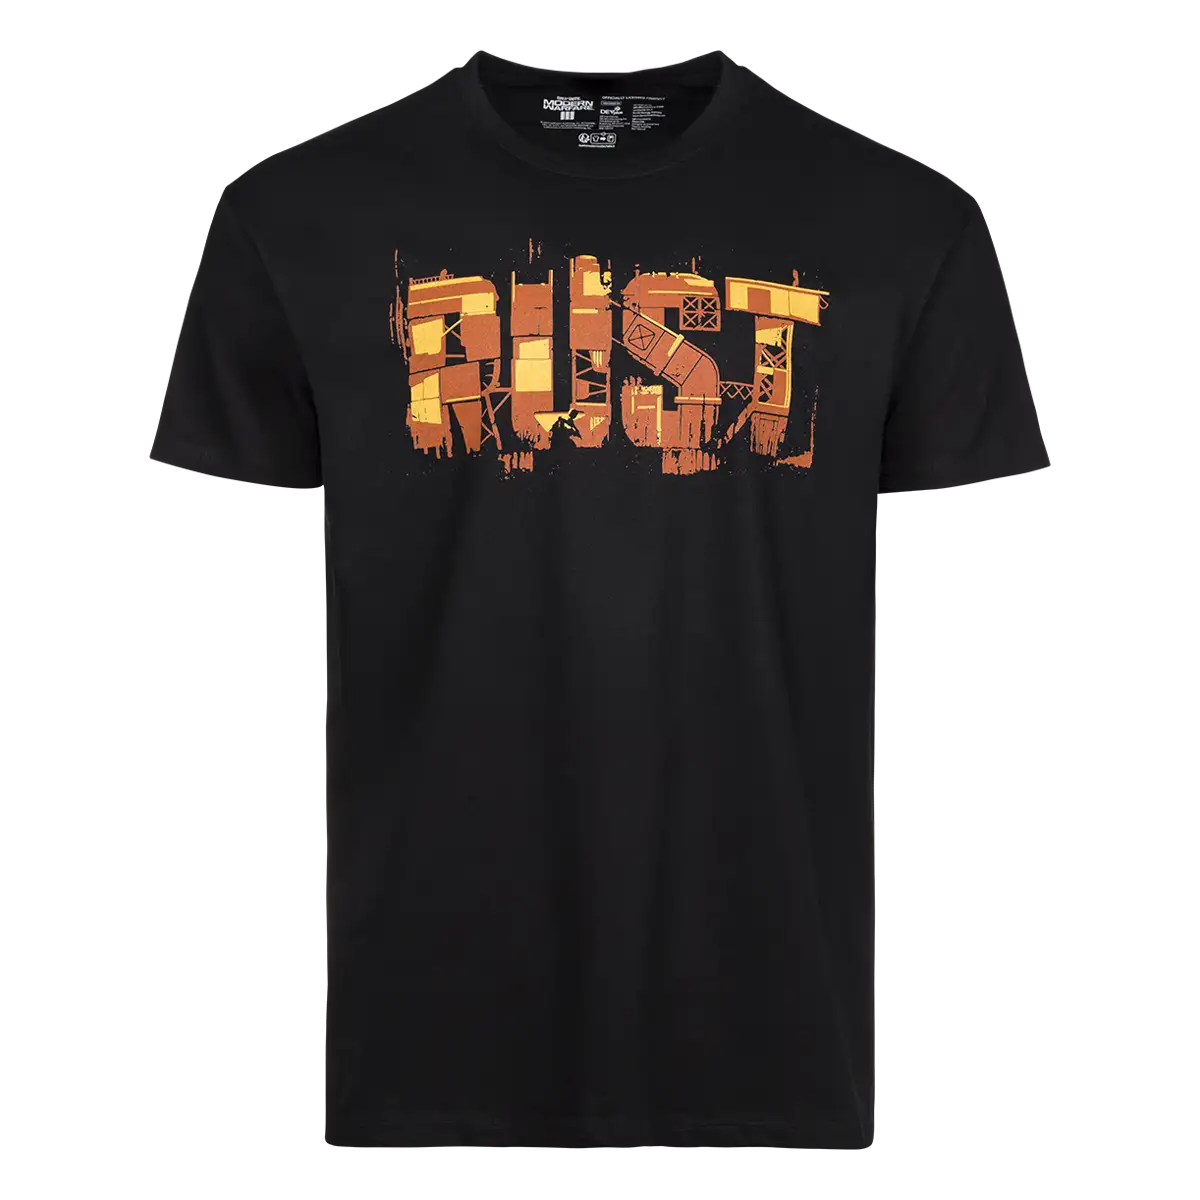 Call of Duty Unisex T-Shirt "Rust" Cover